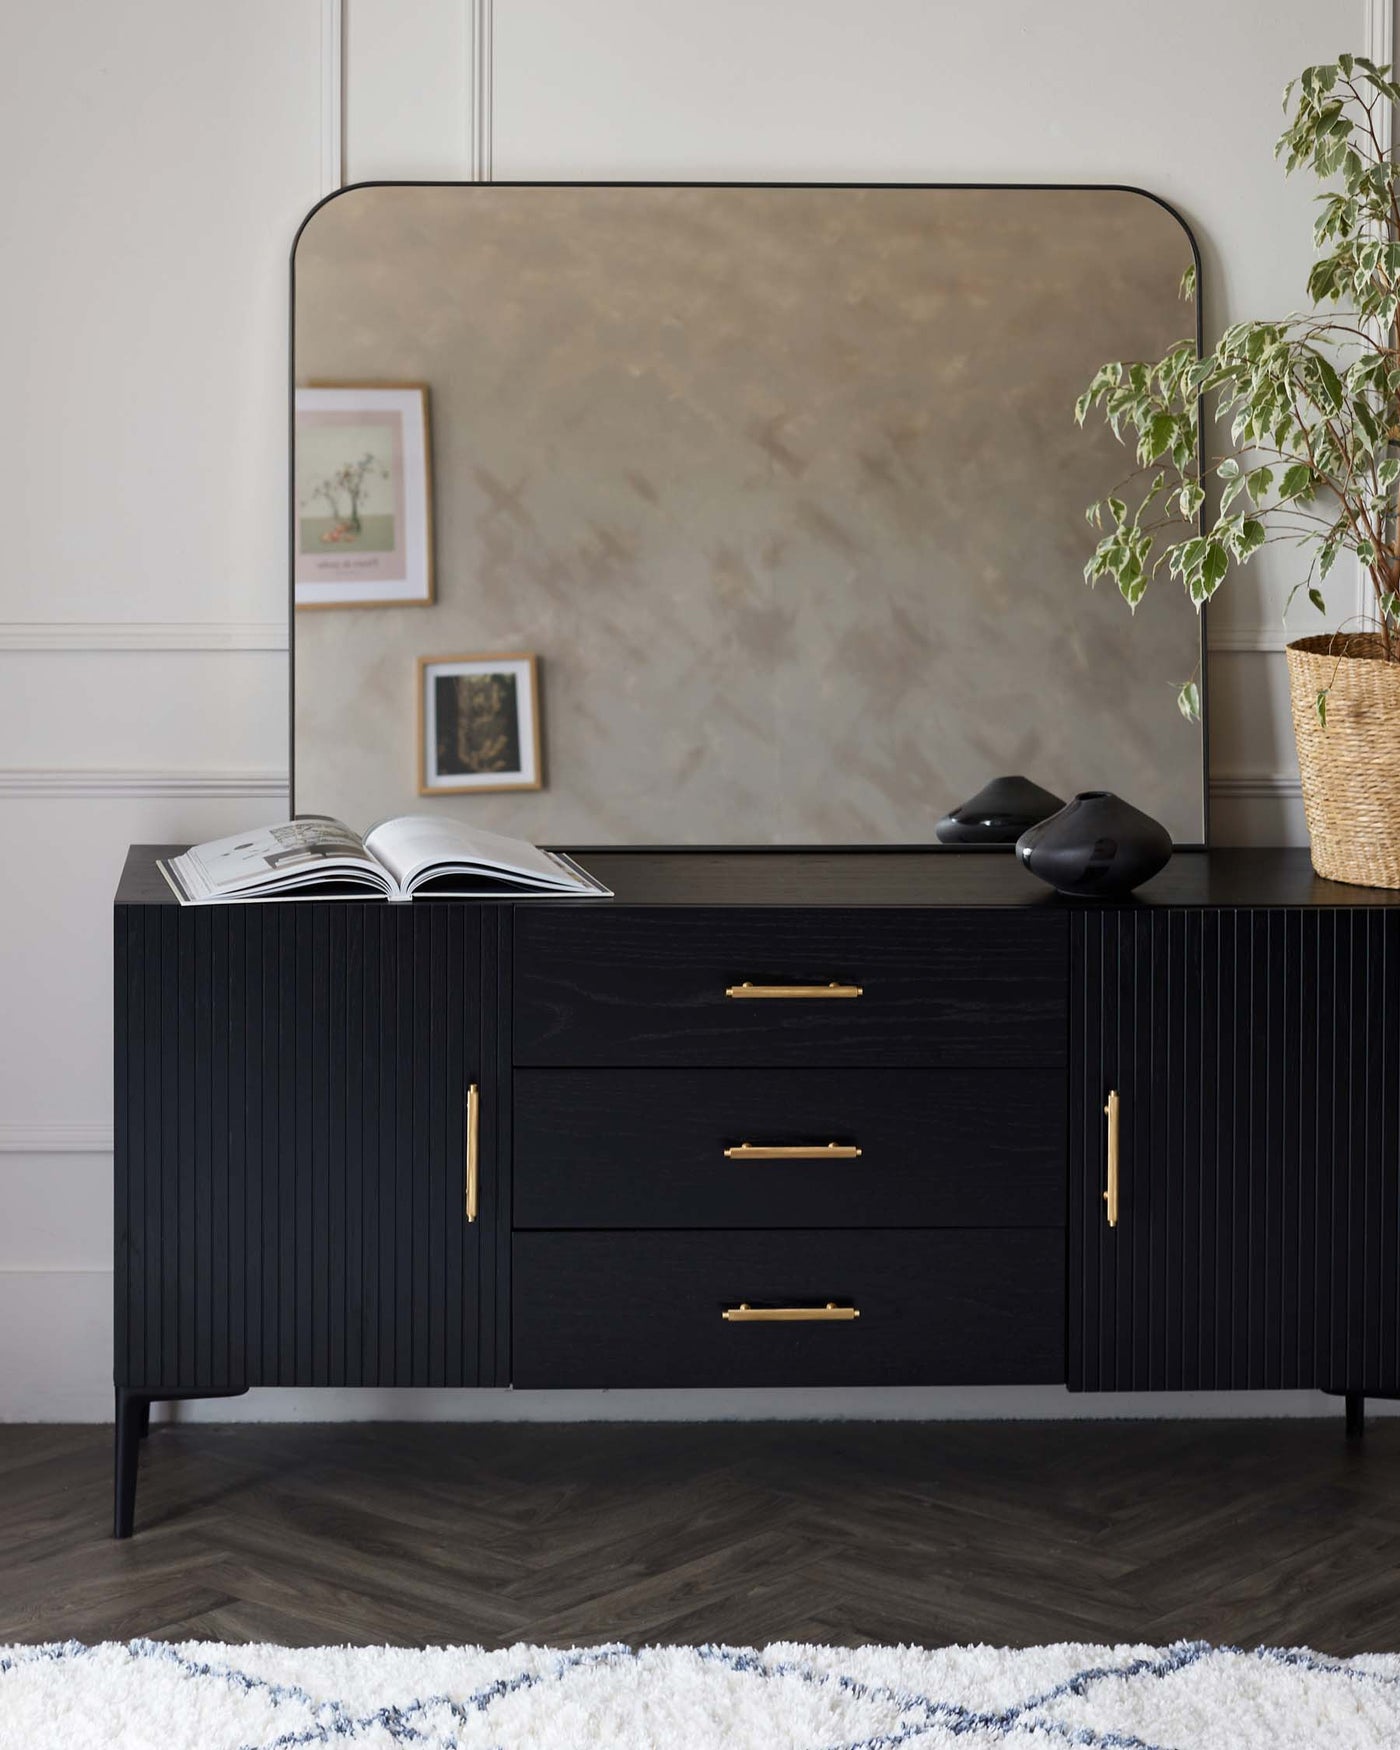 Elegant black wooden sideboard with ribbed detailing and brass hardware, accompanied by a large, rectangular, slightly curved, smoke-tinted mirror. The sideboard features three drawers and two side cabinets, set against a neutral-toned wall above a textured white and blue area rug. Decor includes a potted indoor plant, decorative black sculptures, and a laid-open book.